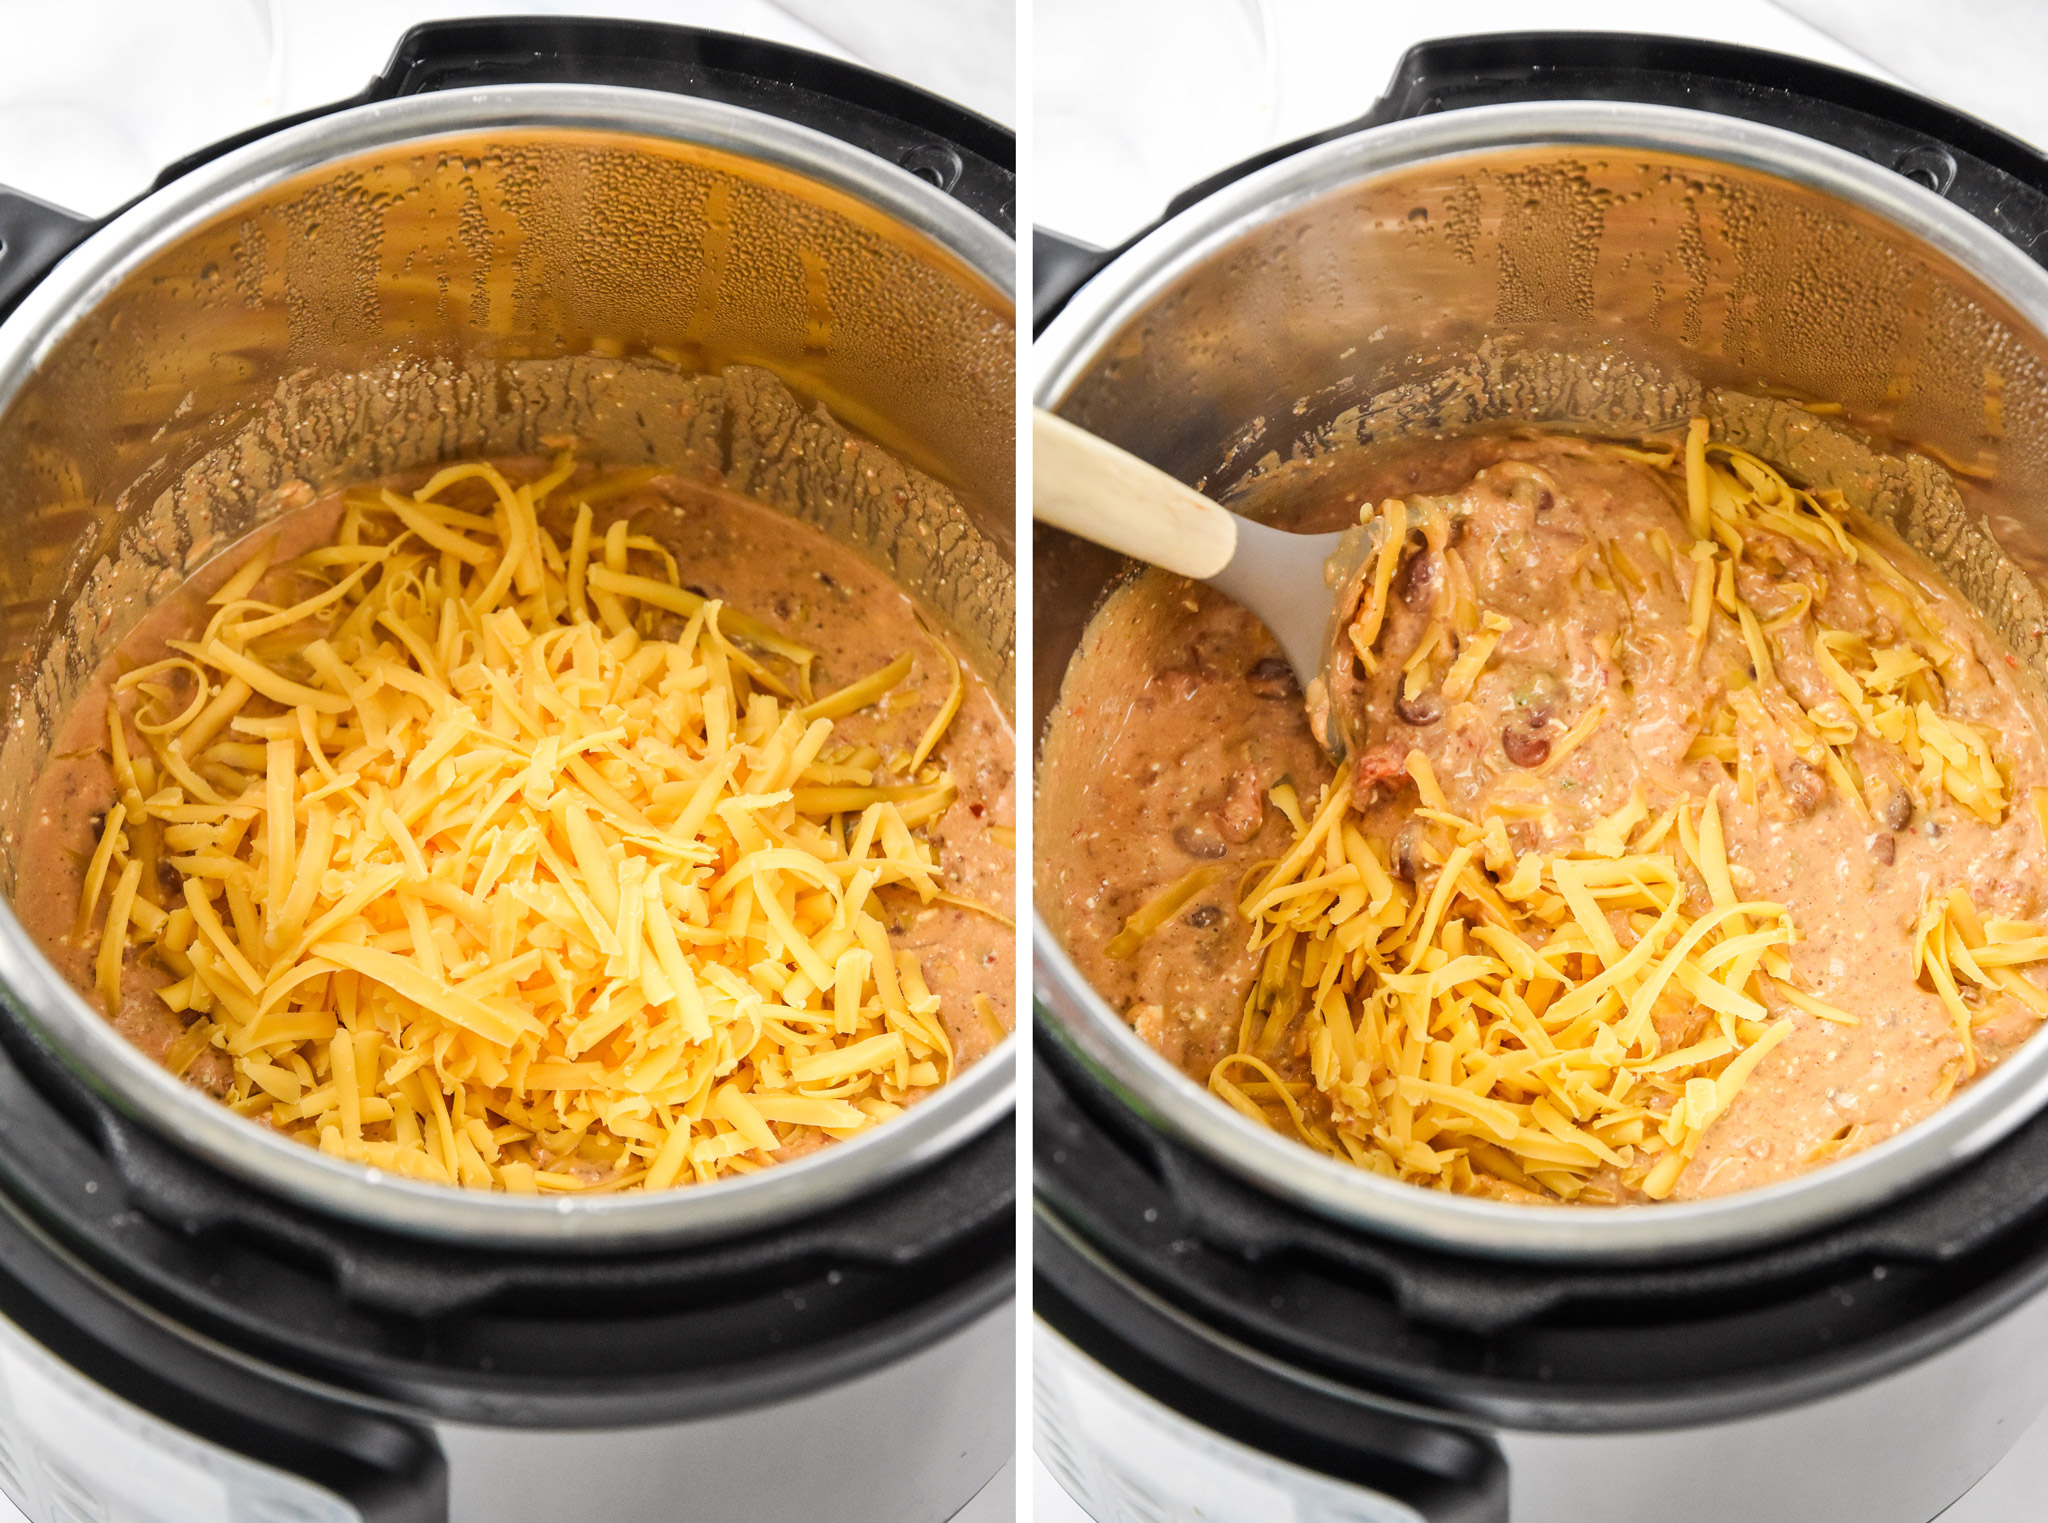 adding cheese to the instant pot for the chili cheese dip